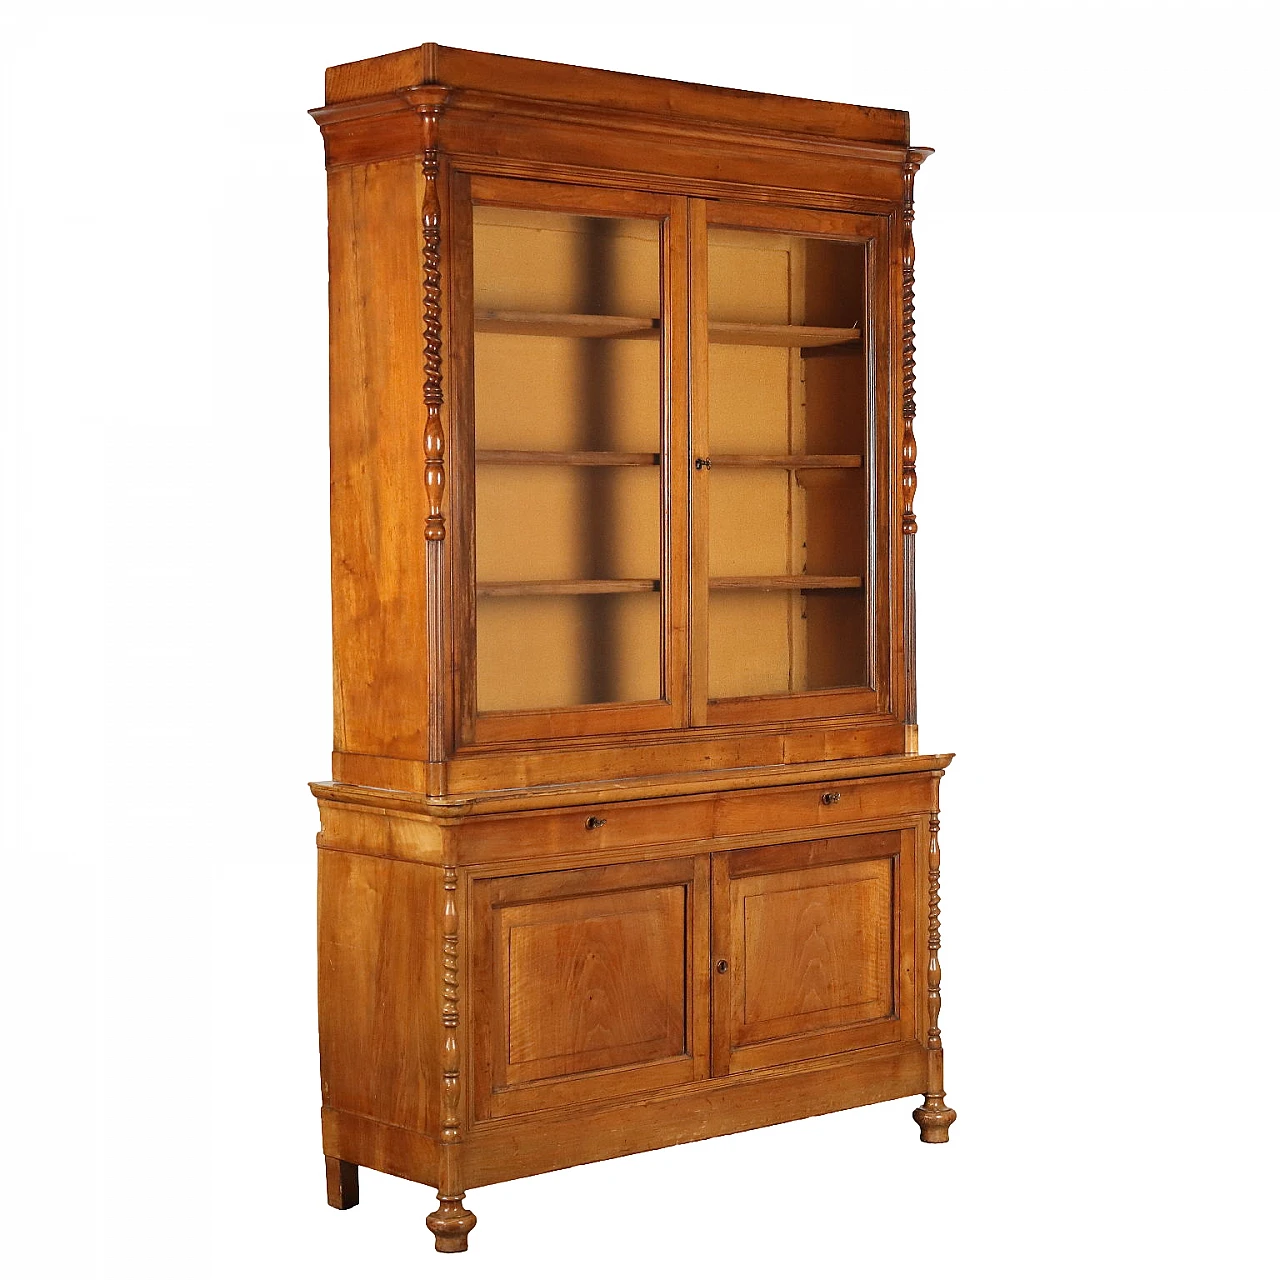 Manzoniana walnut bookcase with display case, second quarter 19th century 1